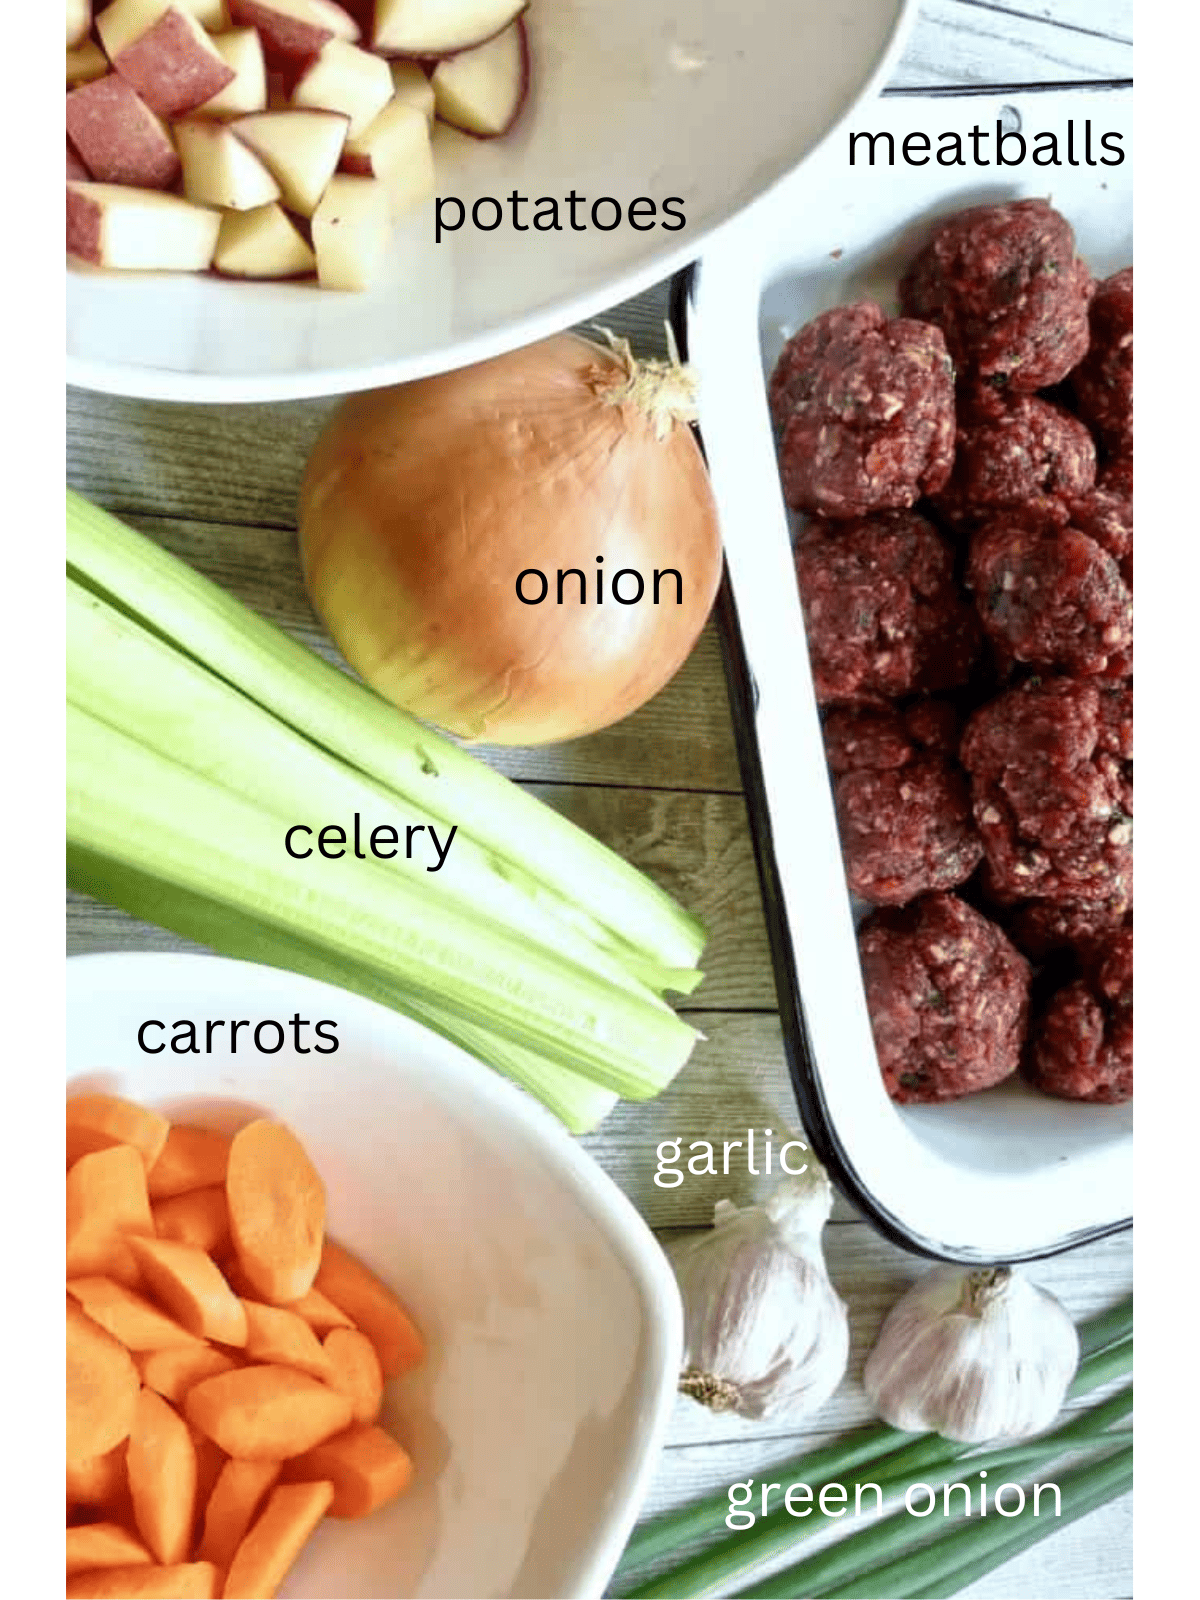 Ingredients of meatballs with potatoes, celery, onion, and carrots.